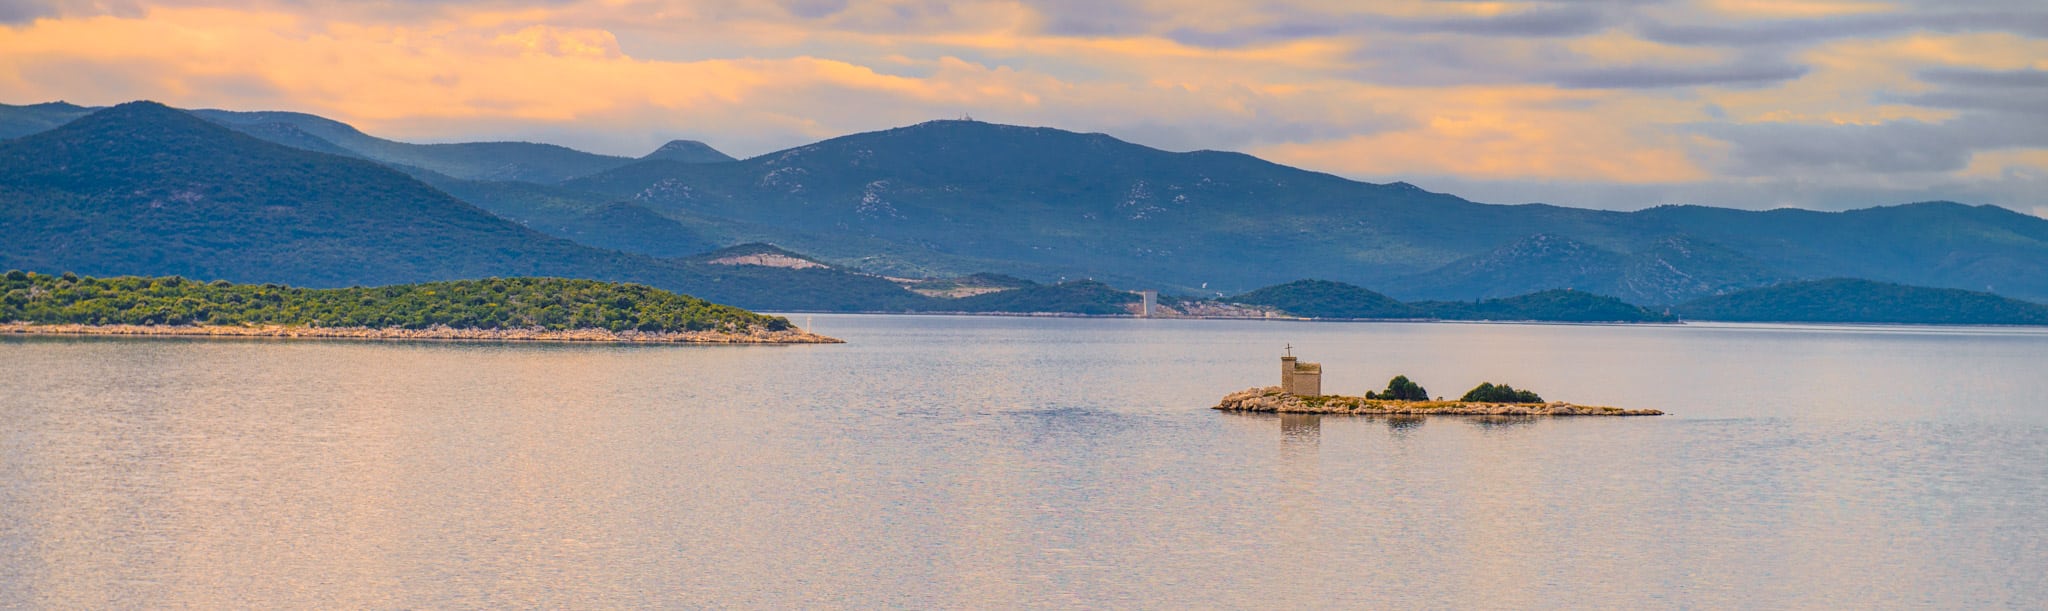 On the highway between Split and Dubrovnik, there is a little islet with a chapel.